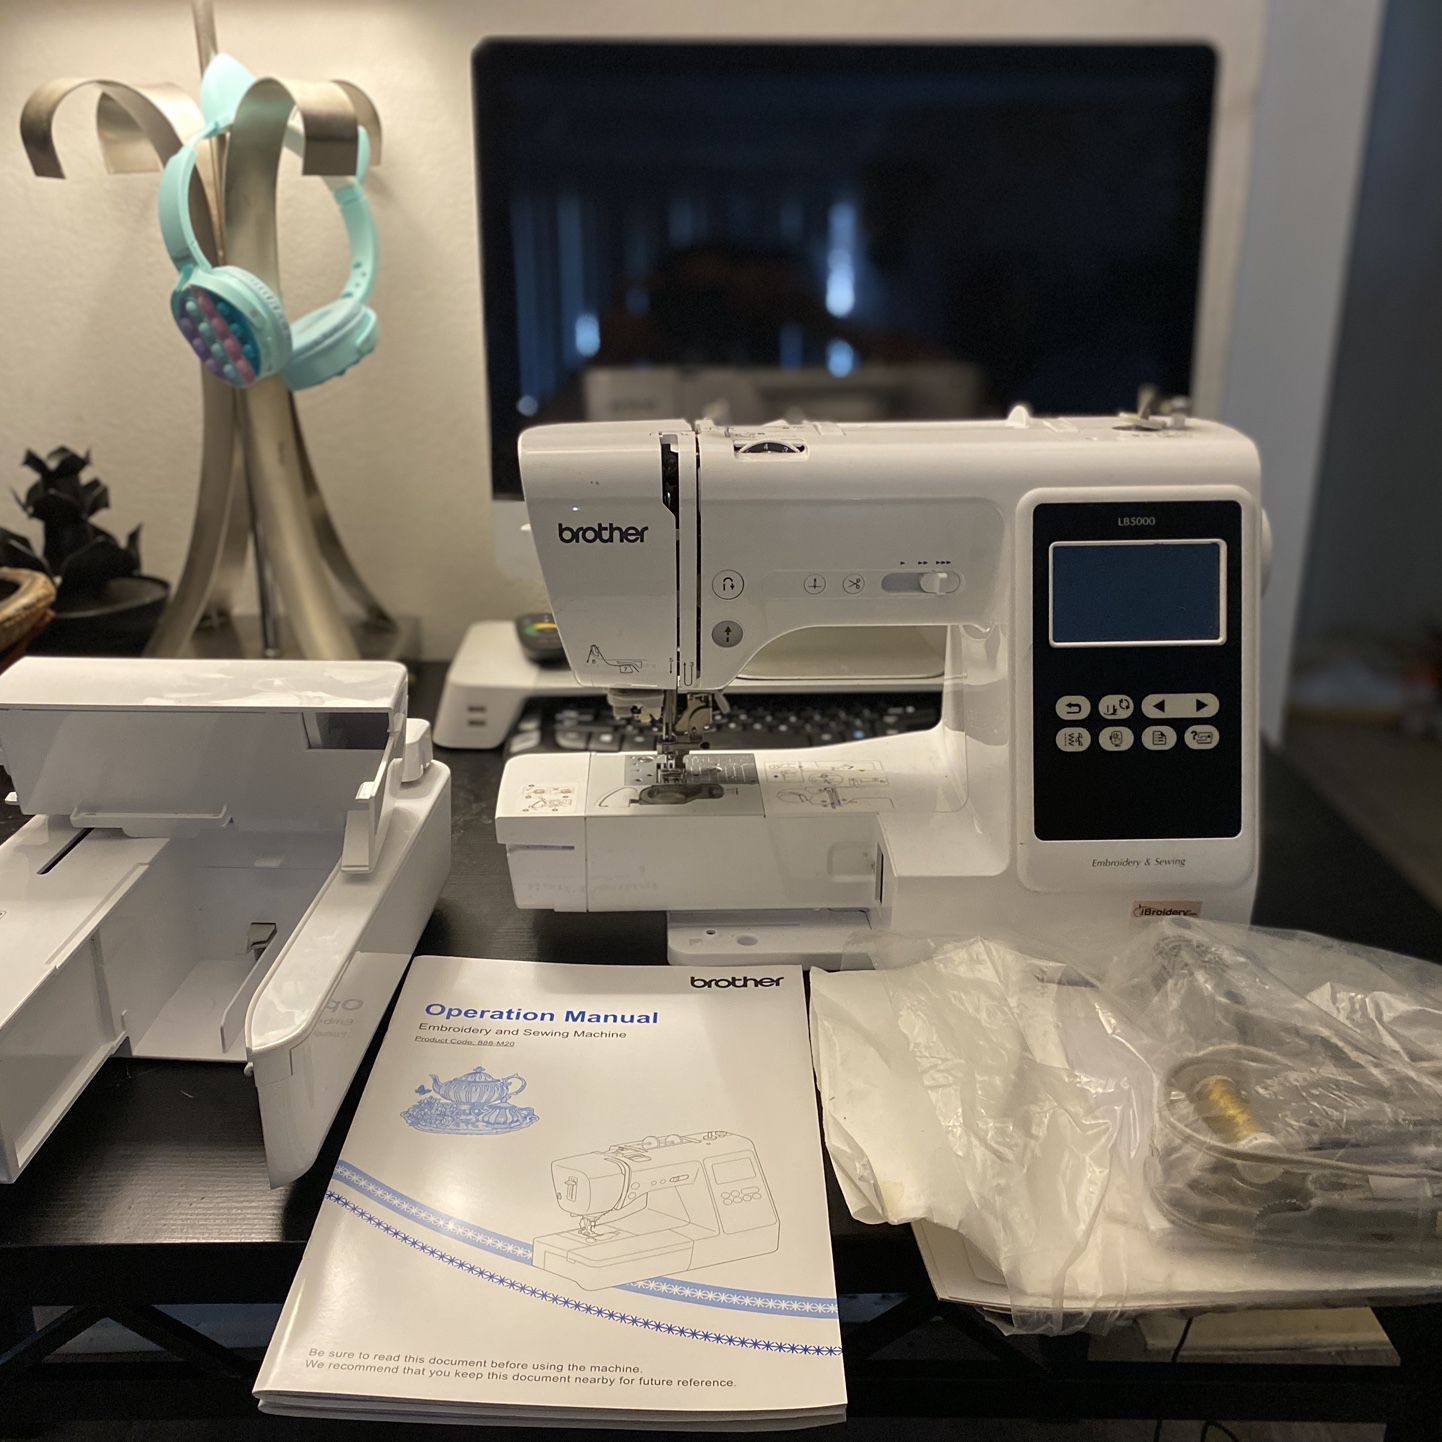 Embroidery with Brother LB5000 